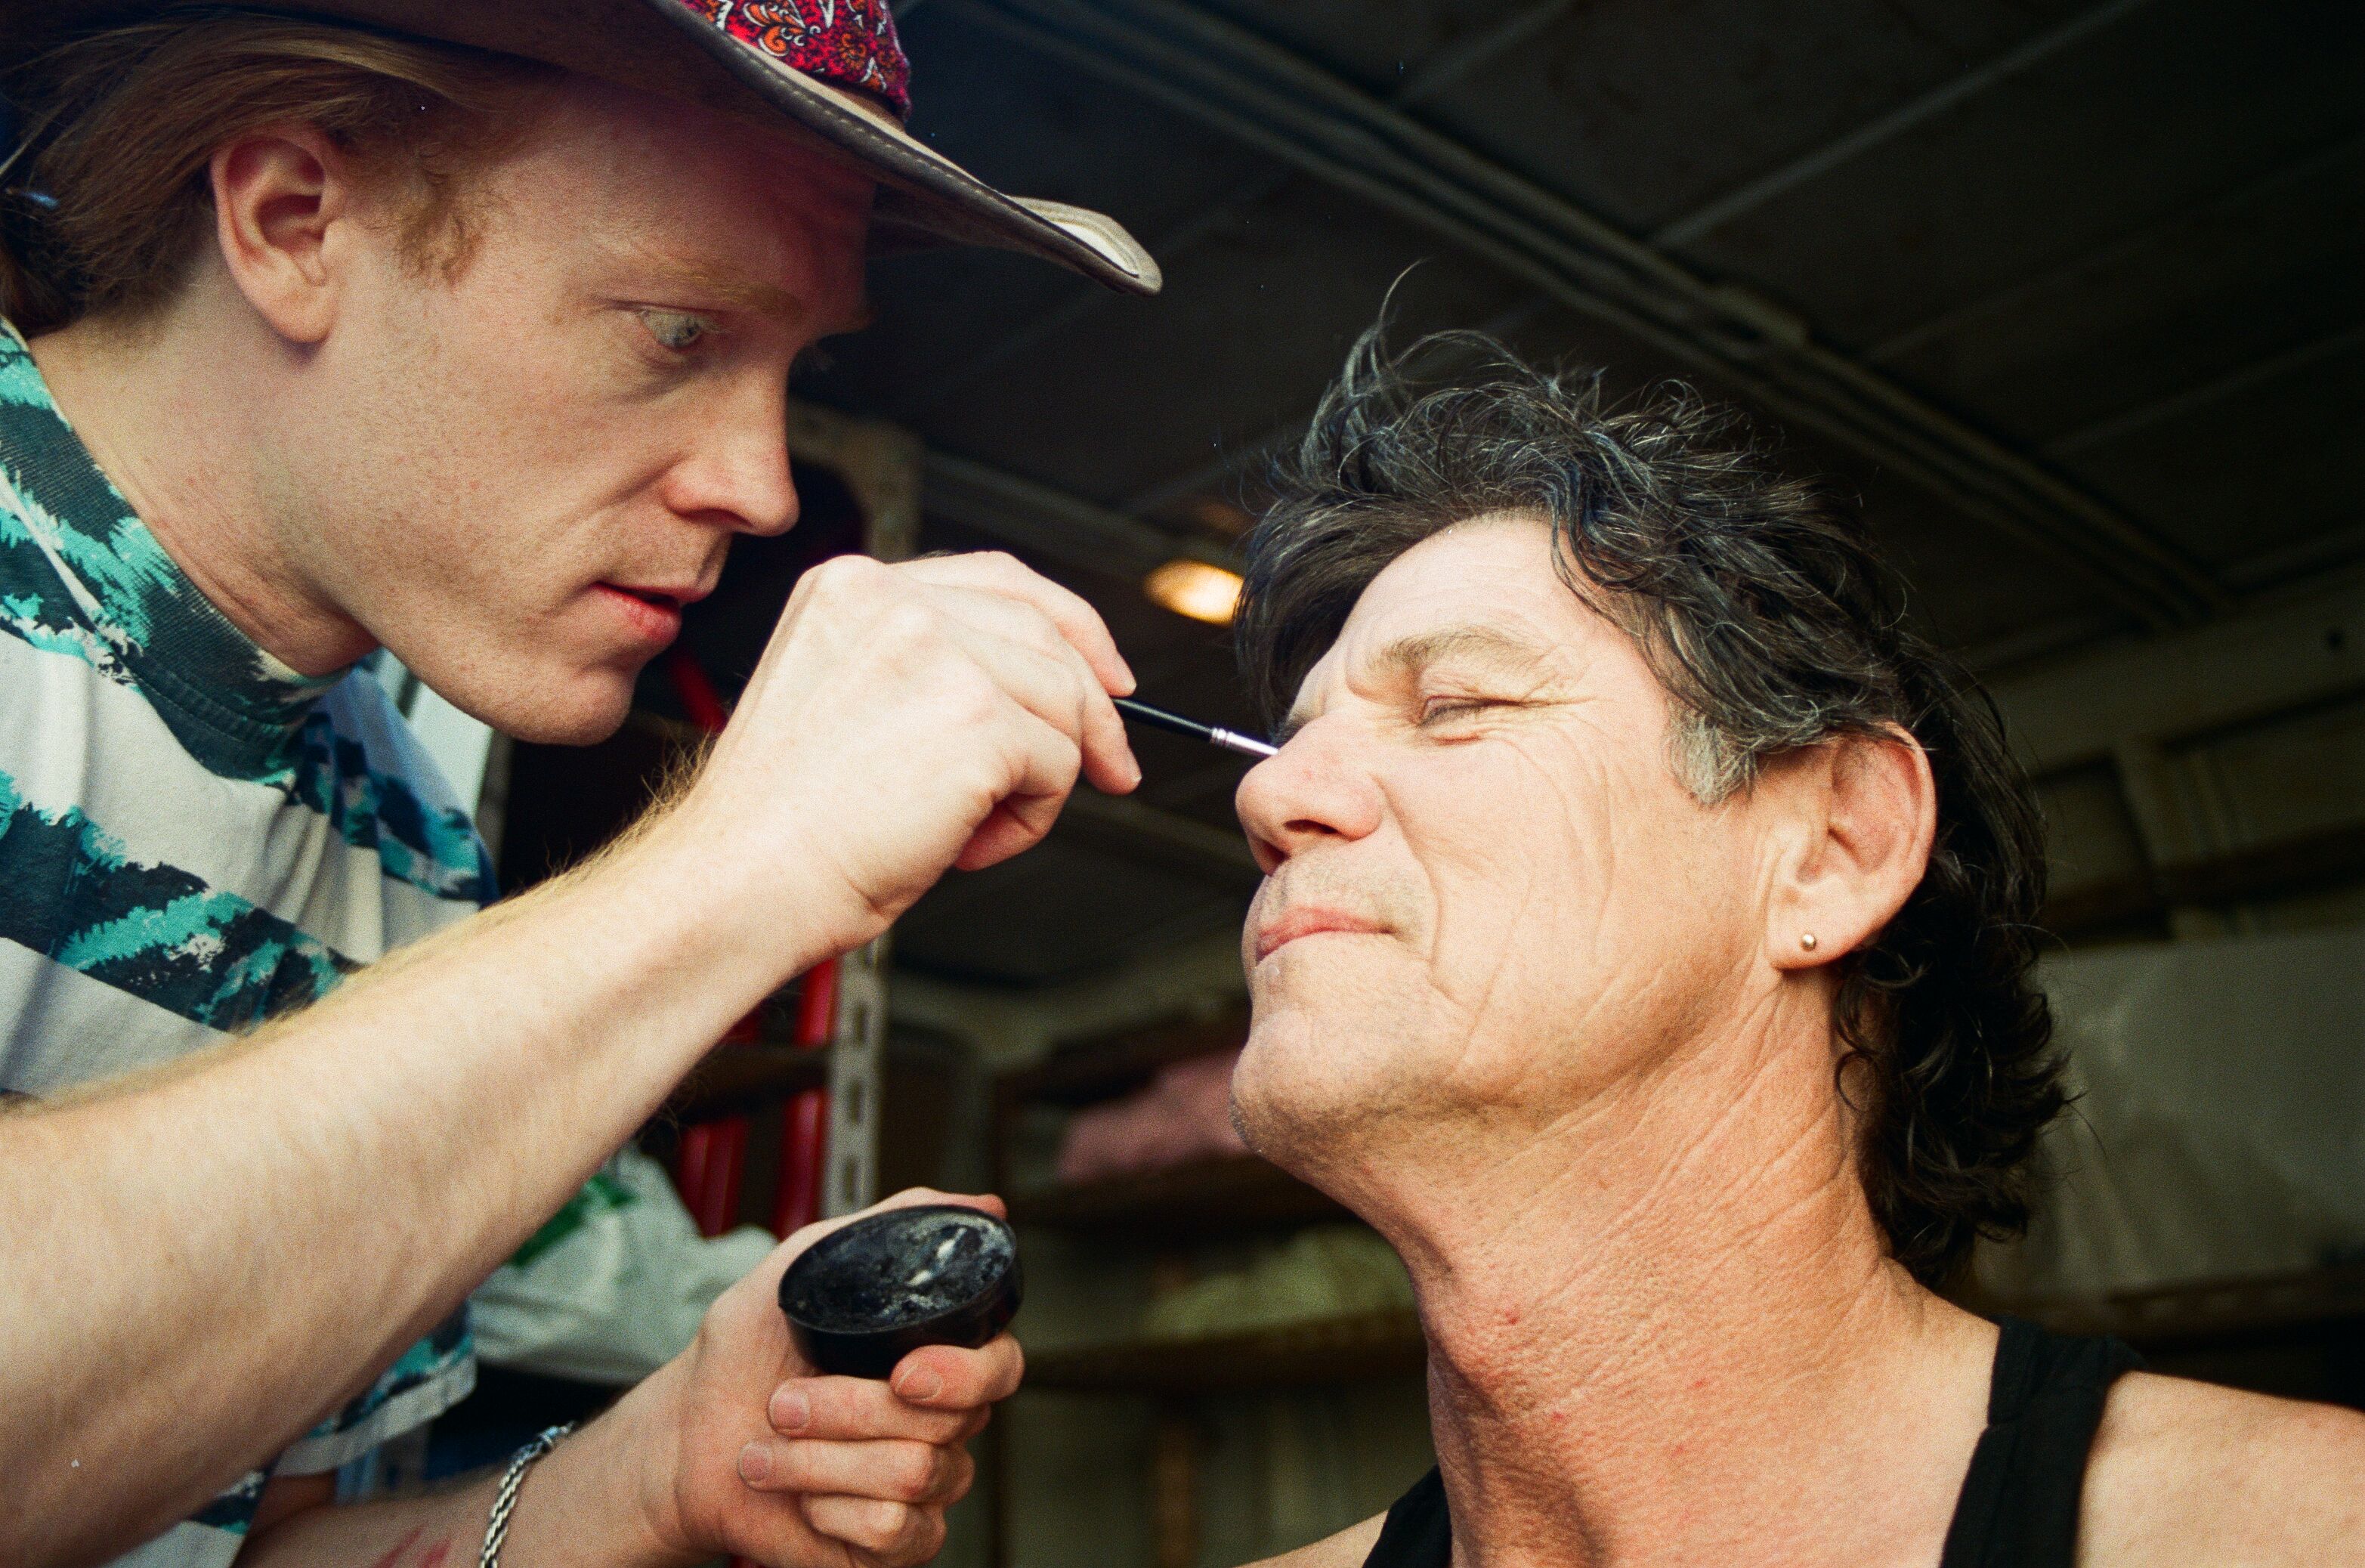 Applying some makeup on location, 2003.